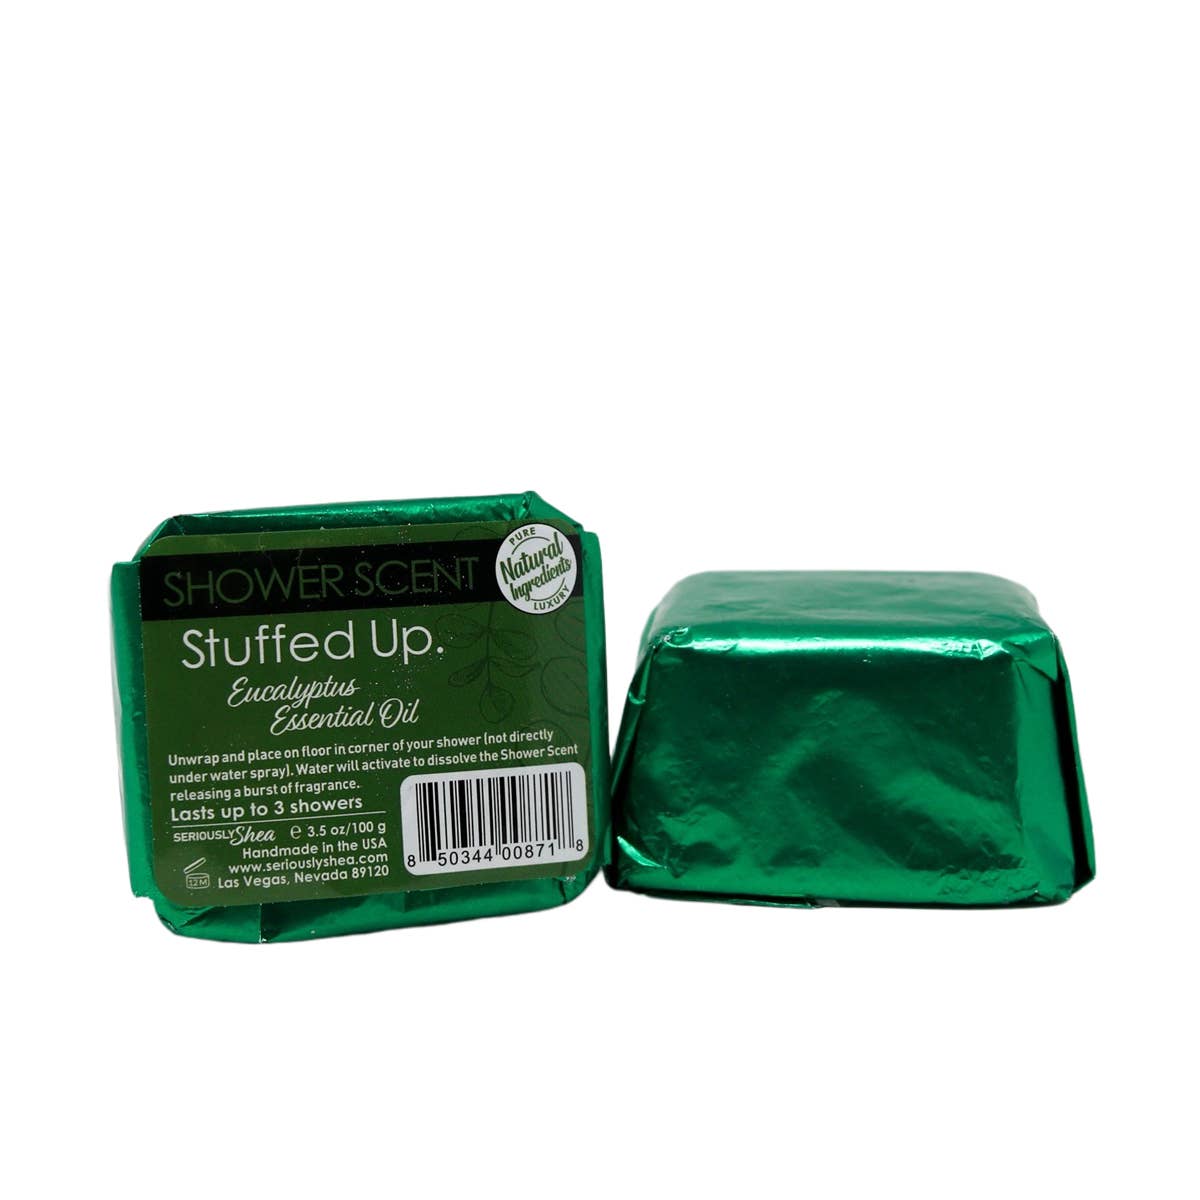 Extra Large Shower Steamers- Stuffed Up (Eucalyptus)